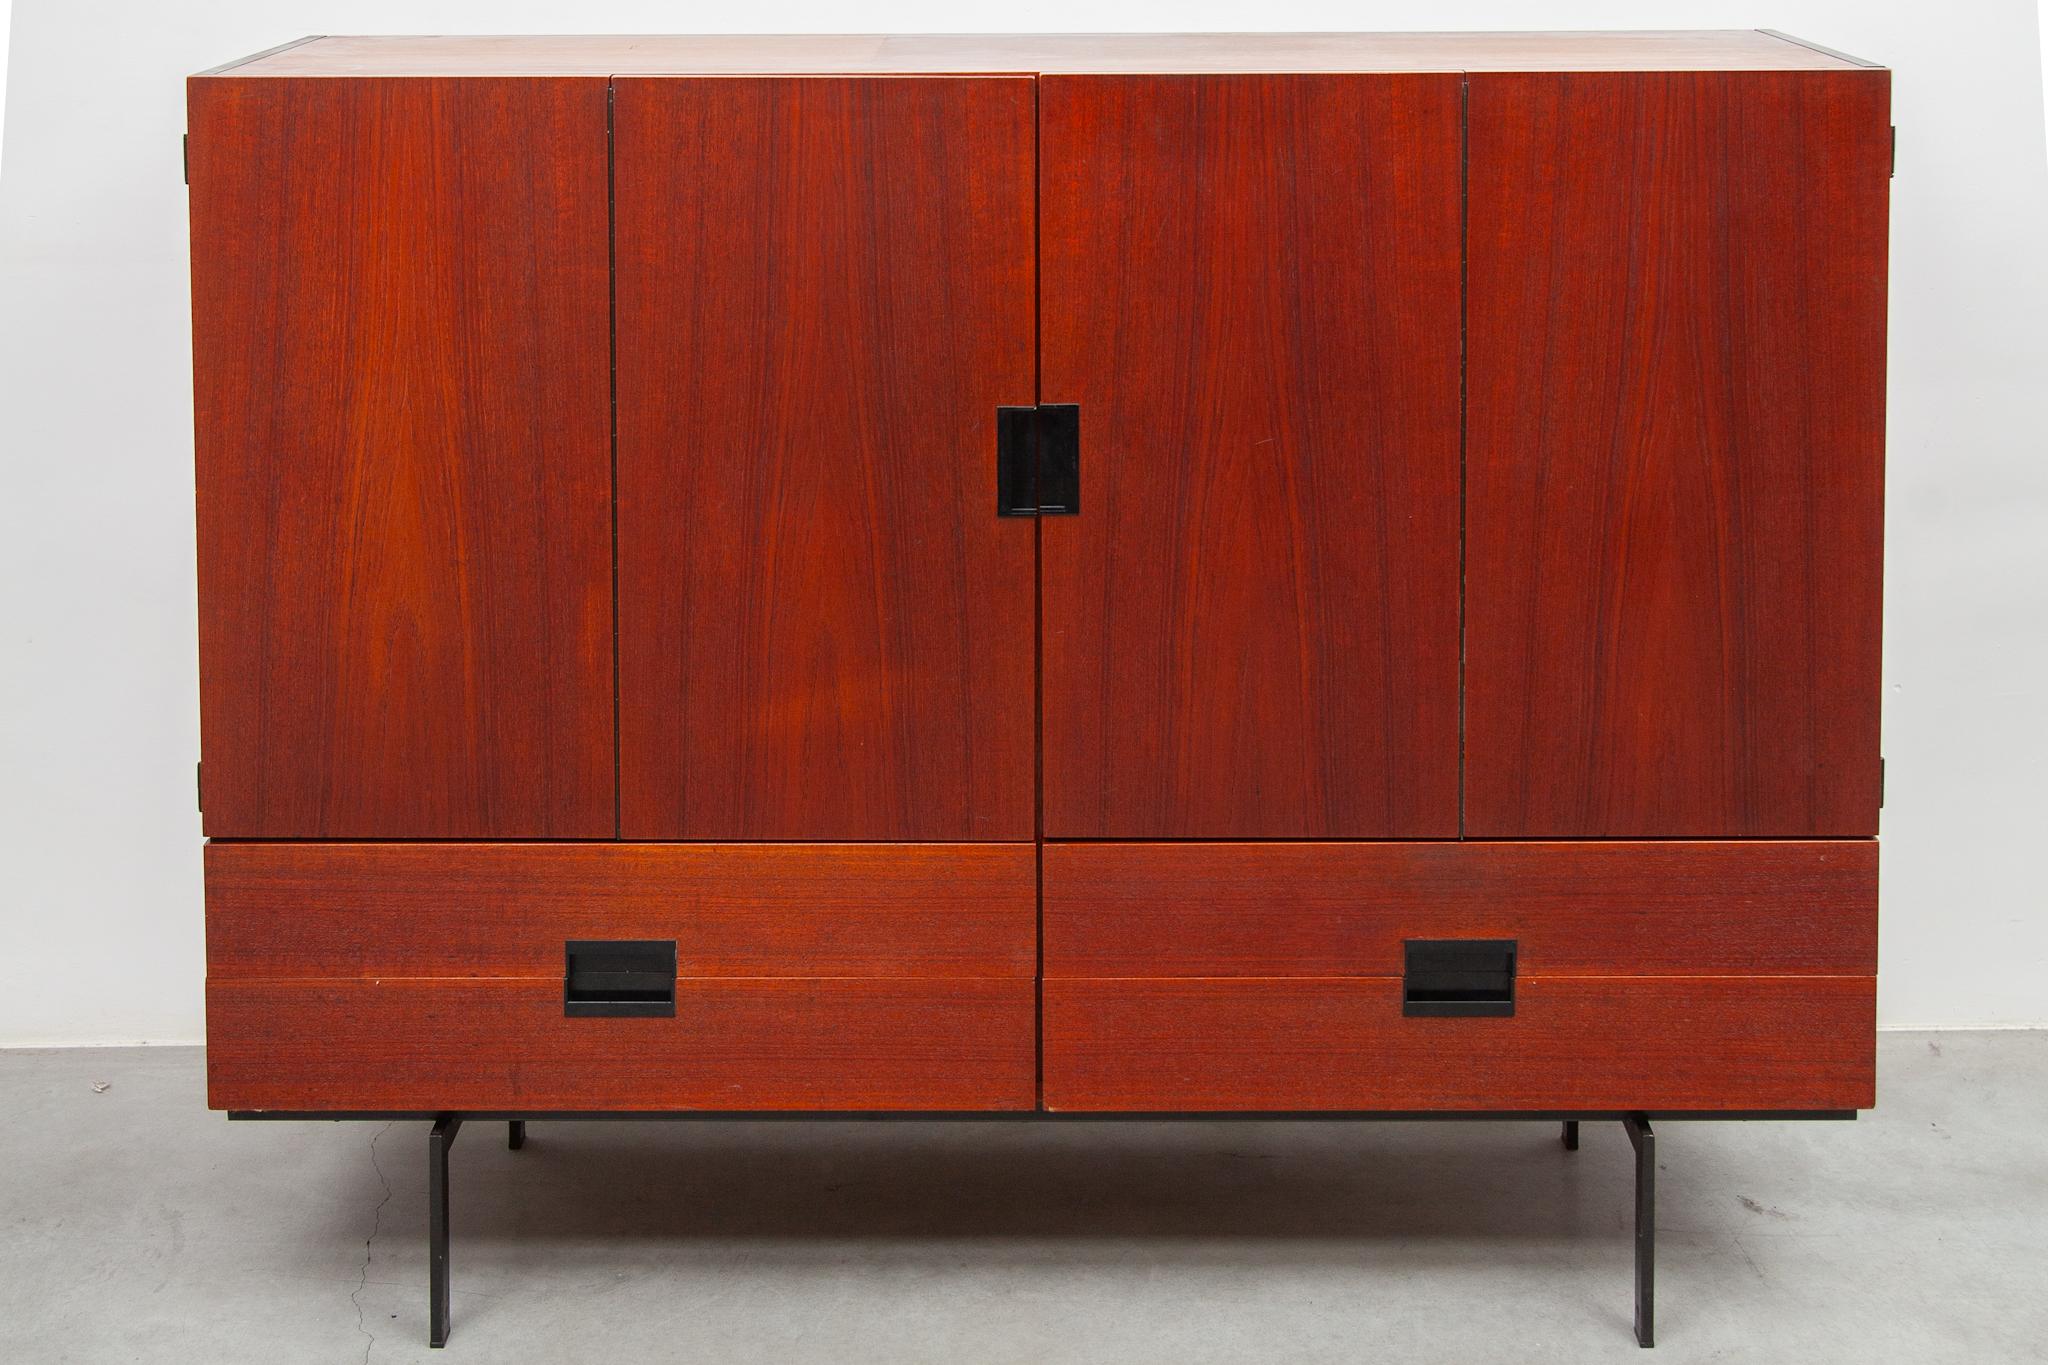 Rare beautiful high sideboard designed by the Dutch designer Cees Braakman for Pastoe, a sideboard from the Japanese series CU 04 made in teak with a warm color. Features with harmonica doors beautifully outlined by the bakelite handles. The cabinet